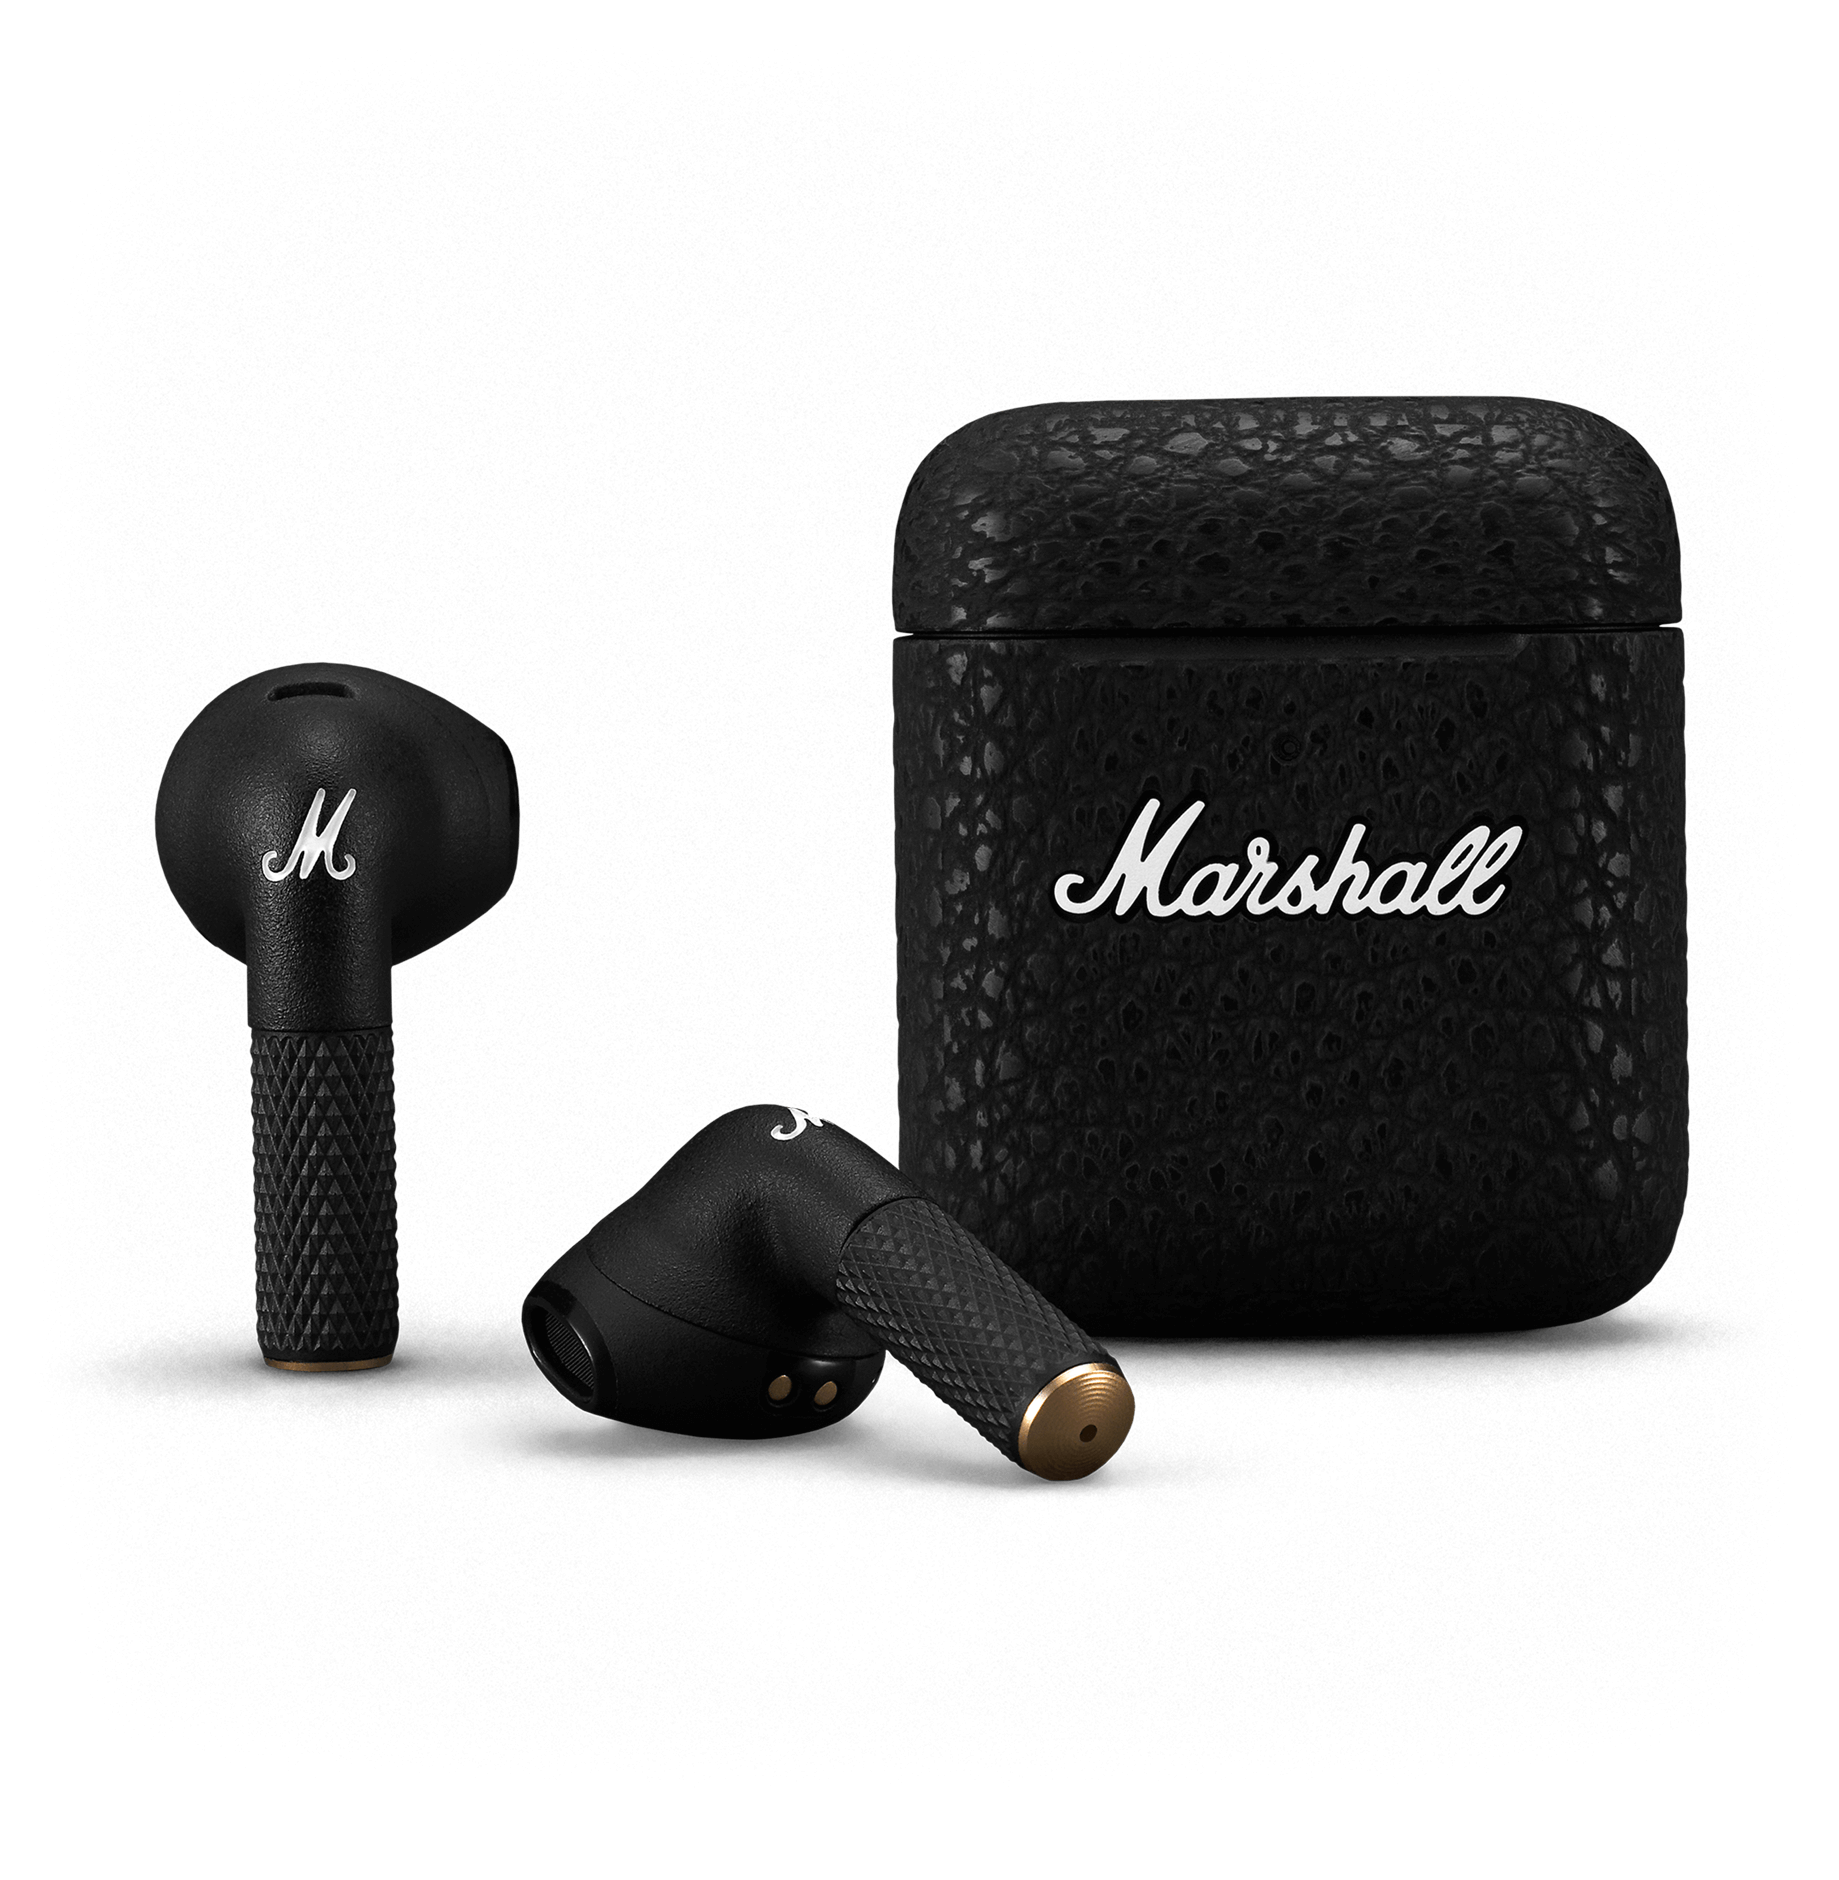 My New Daily Earphones  Marshall Minor 3 Review 